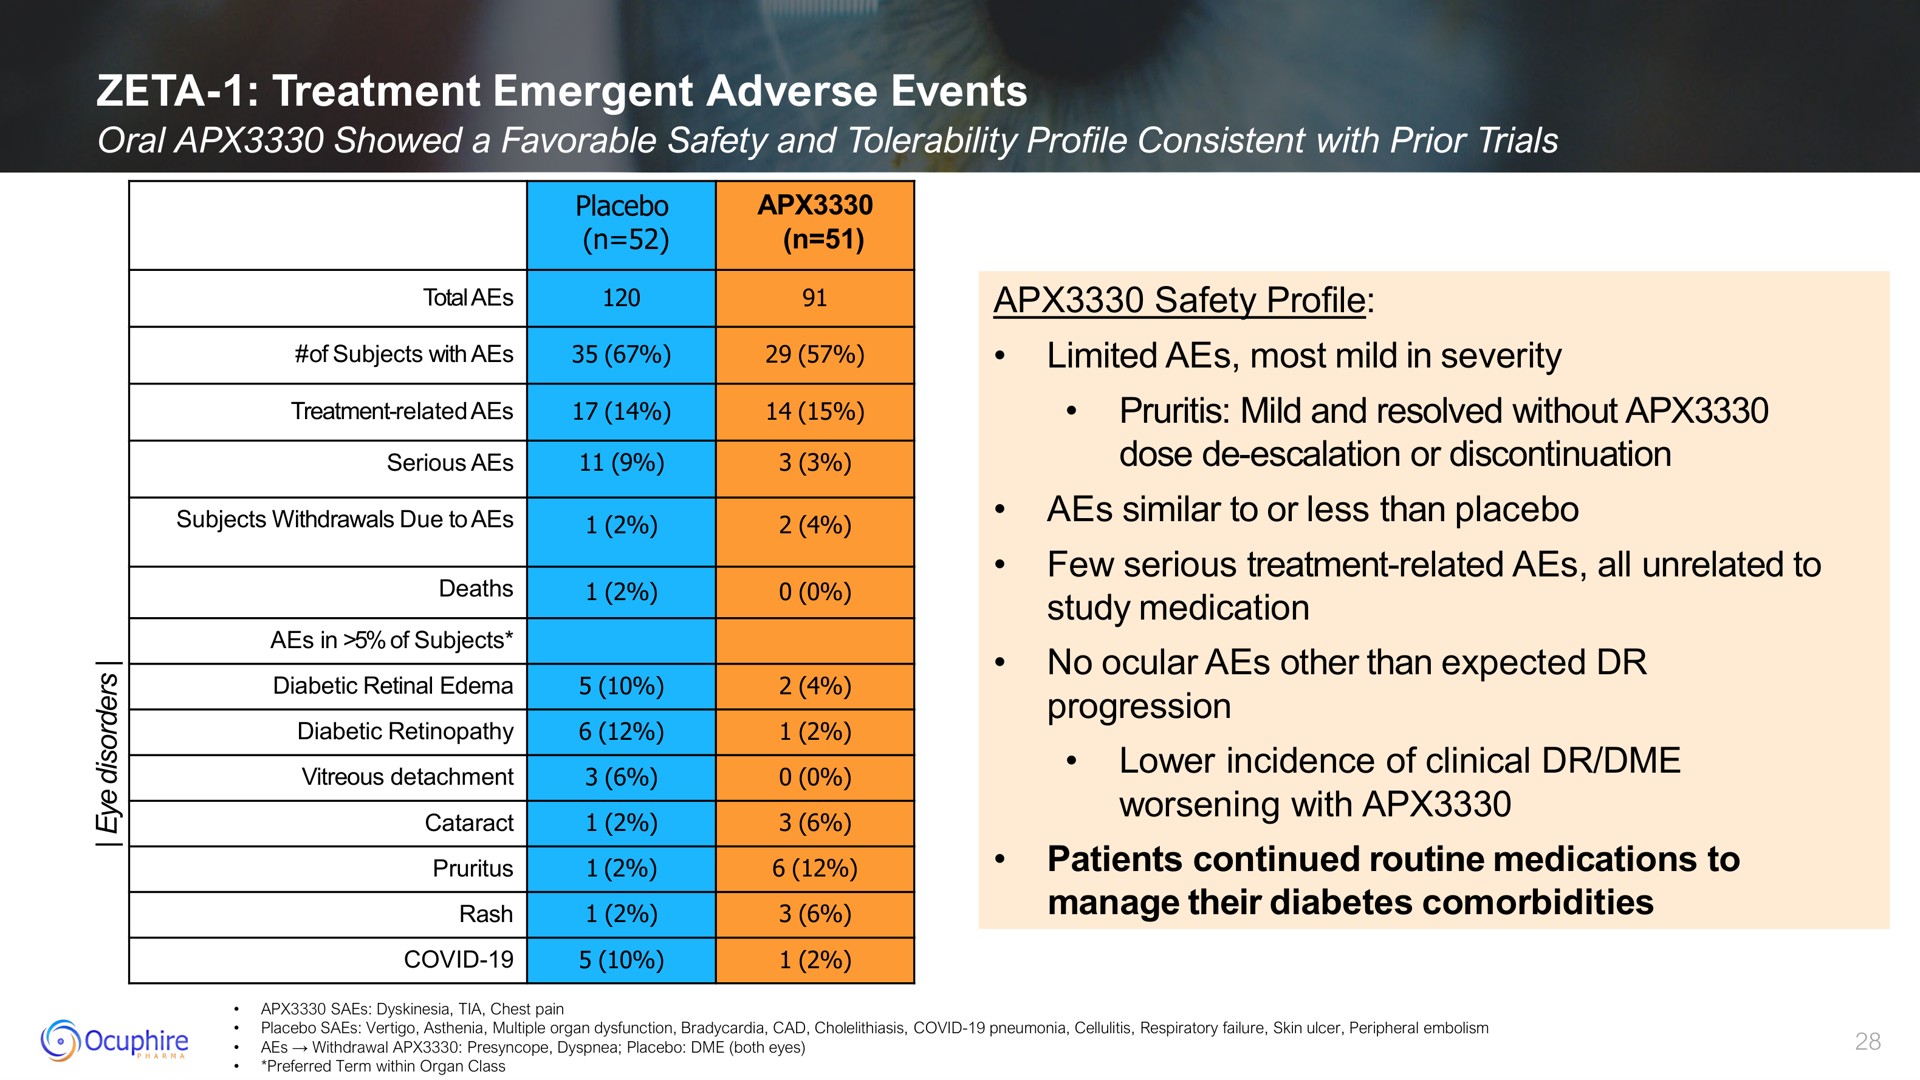 zeta treatment emergent adverse events a mild and resolved without cat | Ocuphire Pharma